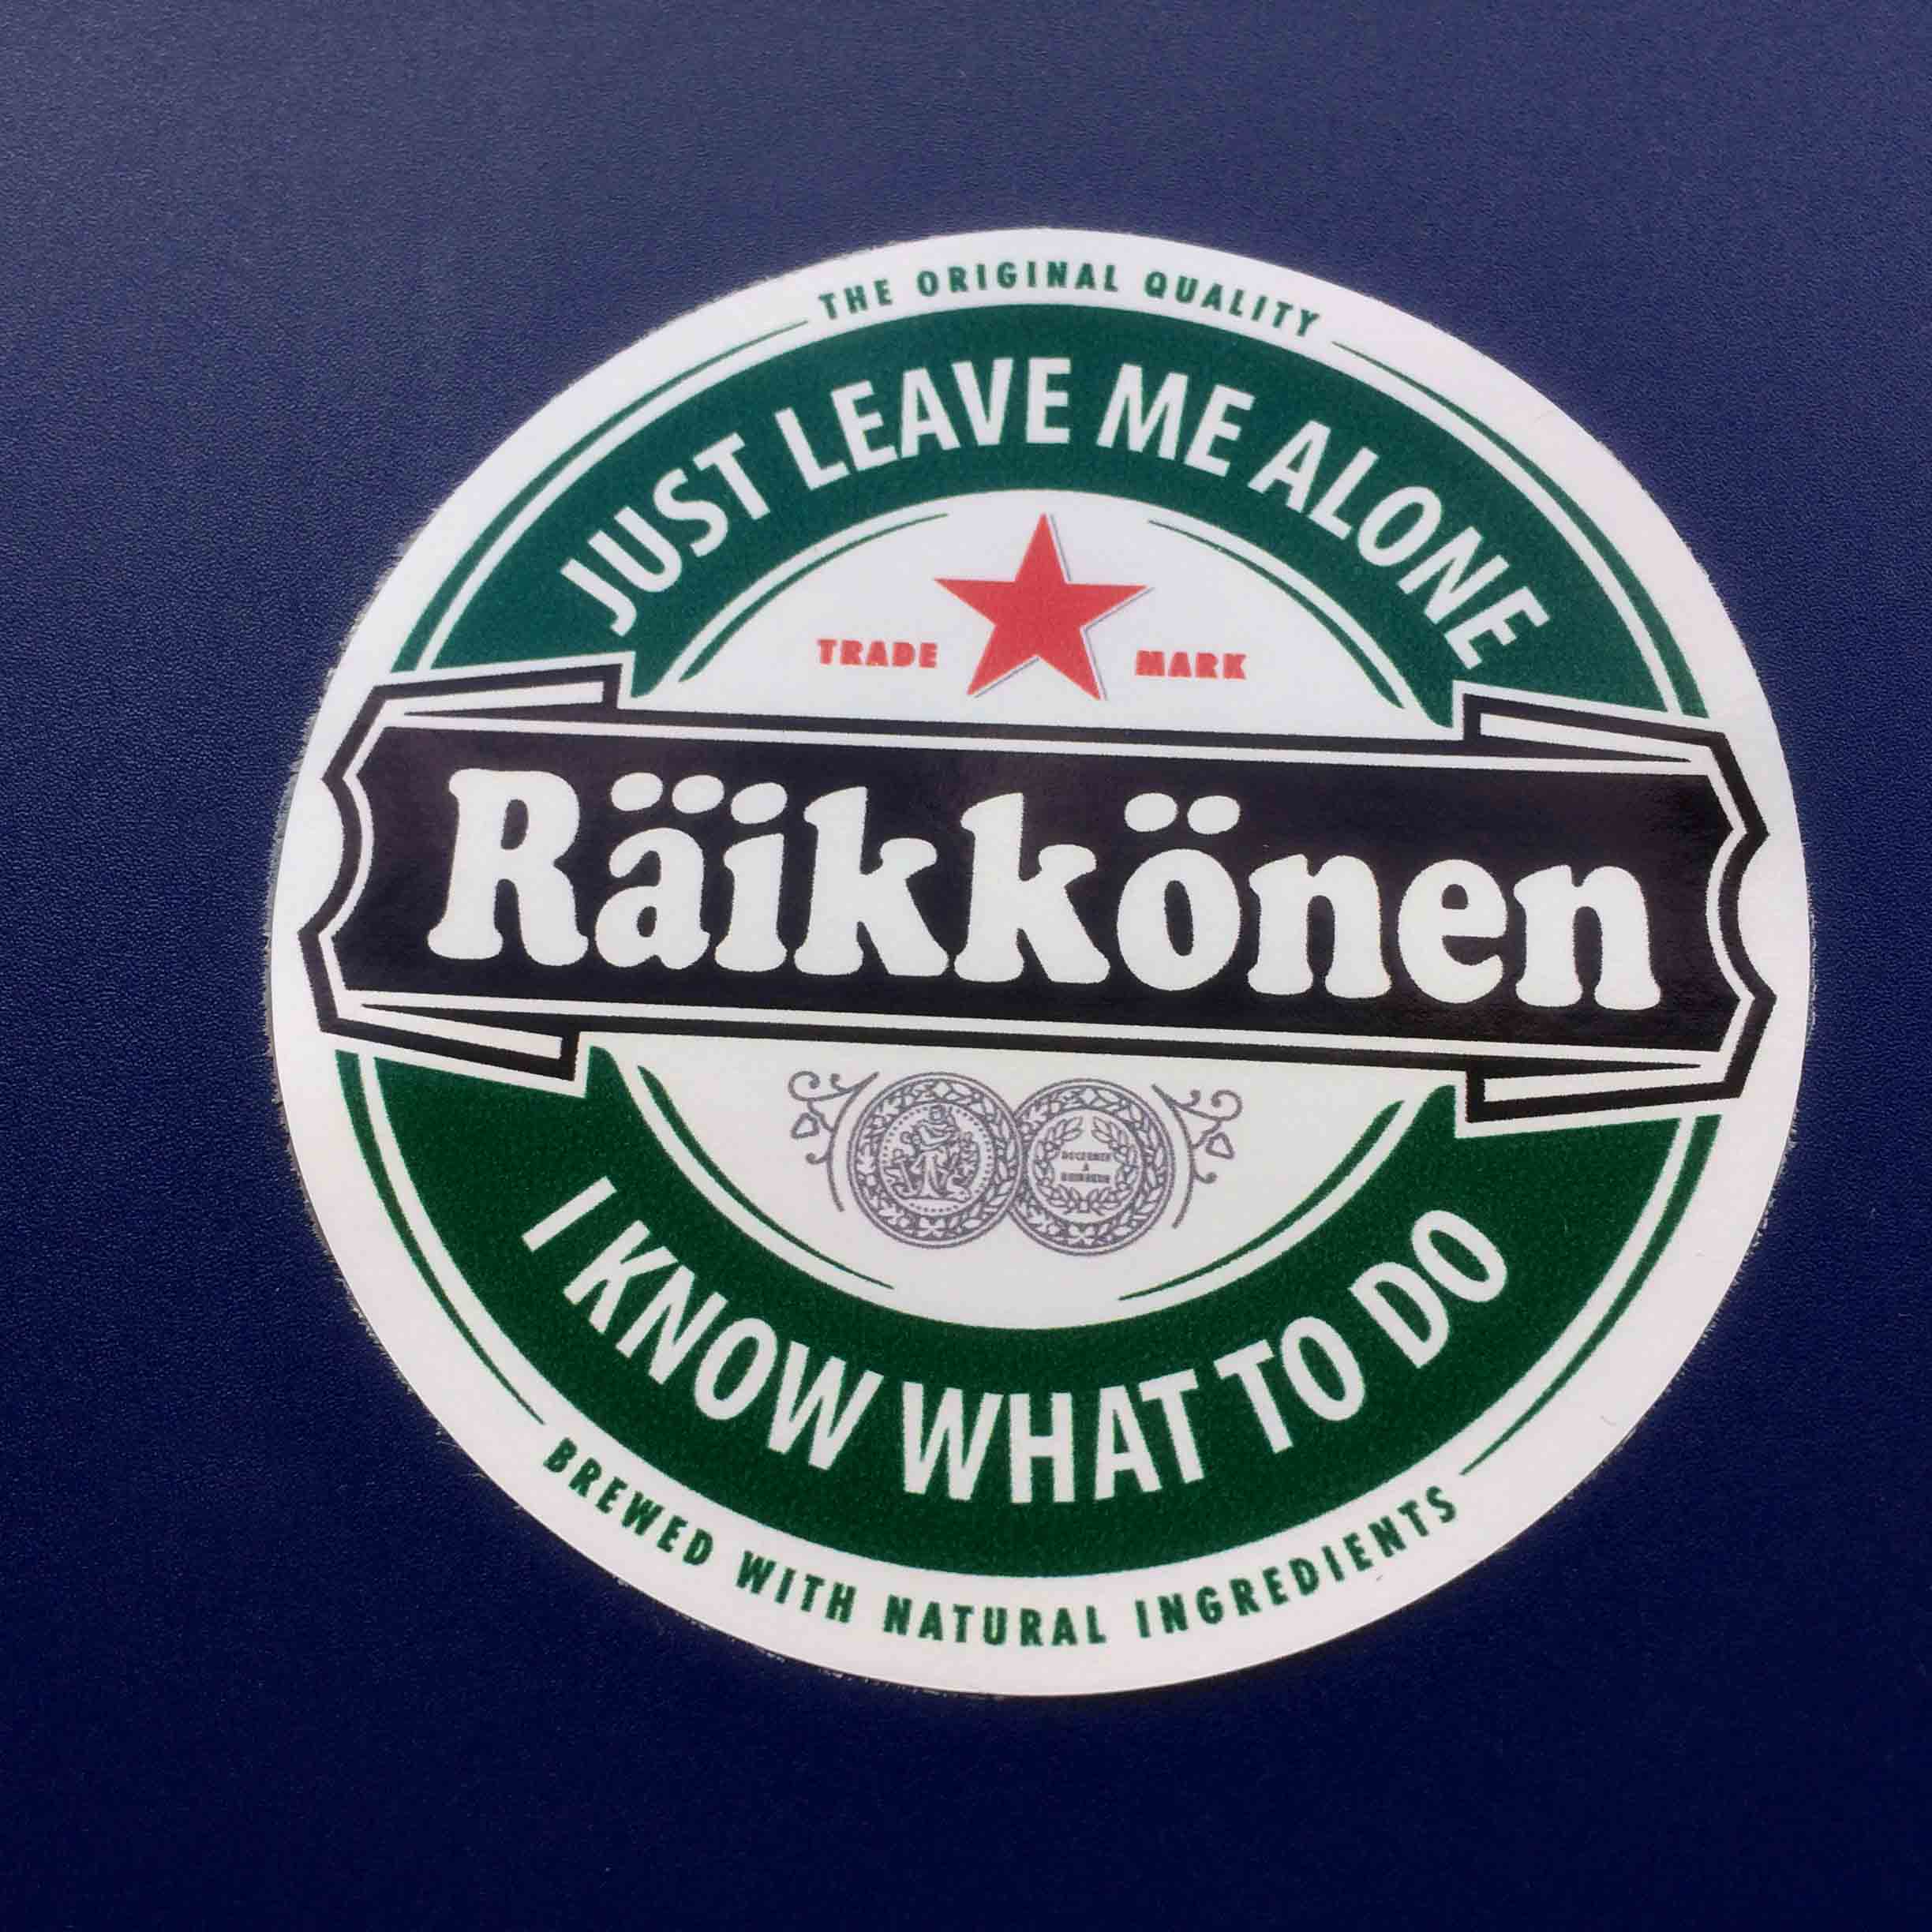 Imitating the Heineken logo. A green circular sticker with a red star. Raikkonen Just Leave Me Alone I Know What To Do. The Original Quality Brewed With Natural Ingredients.